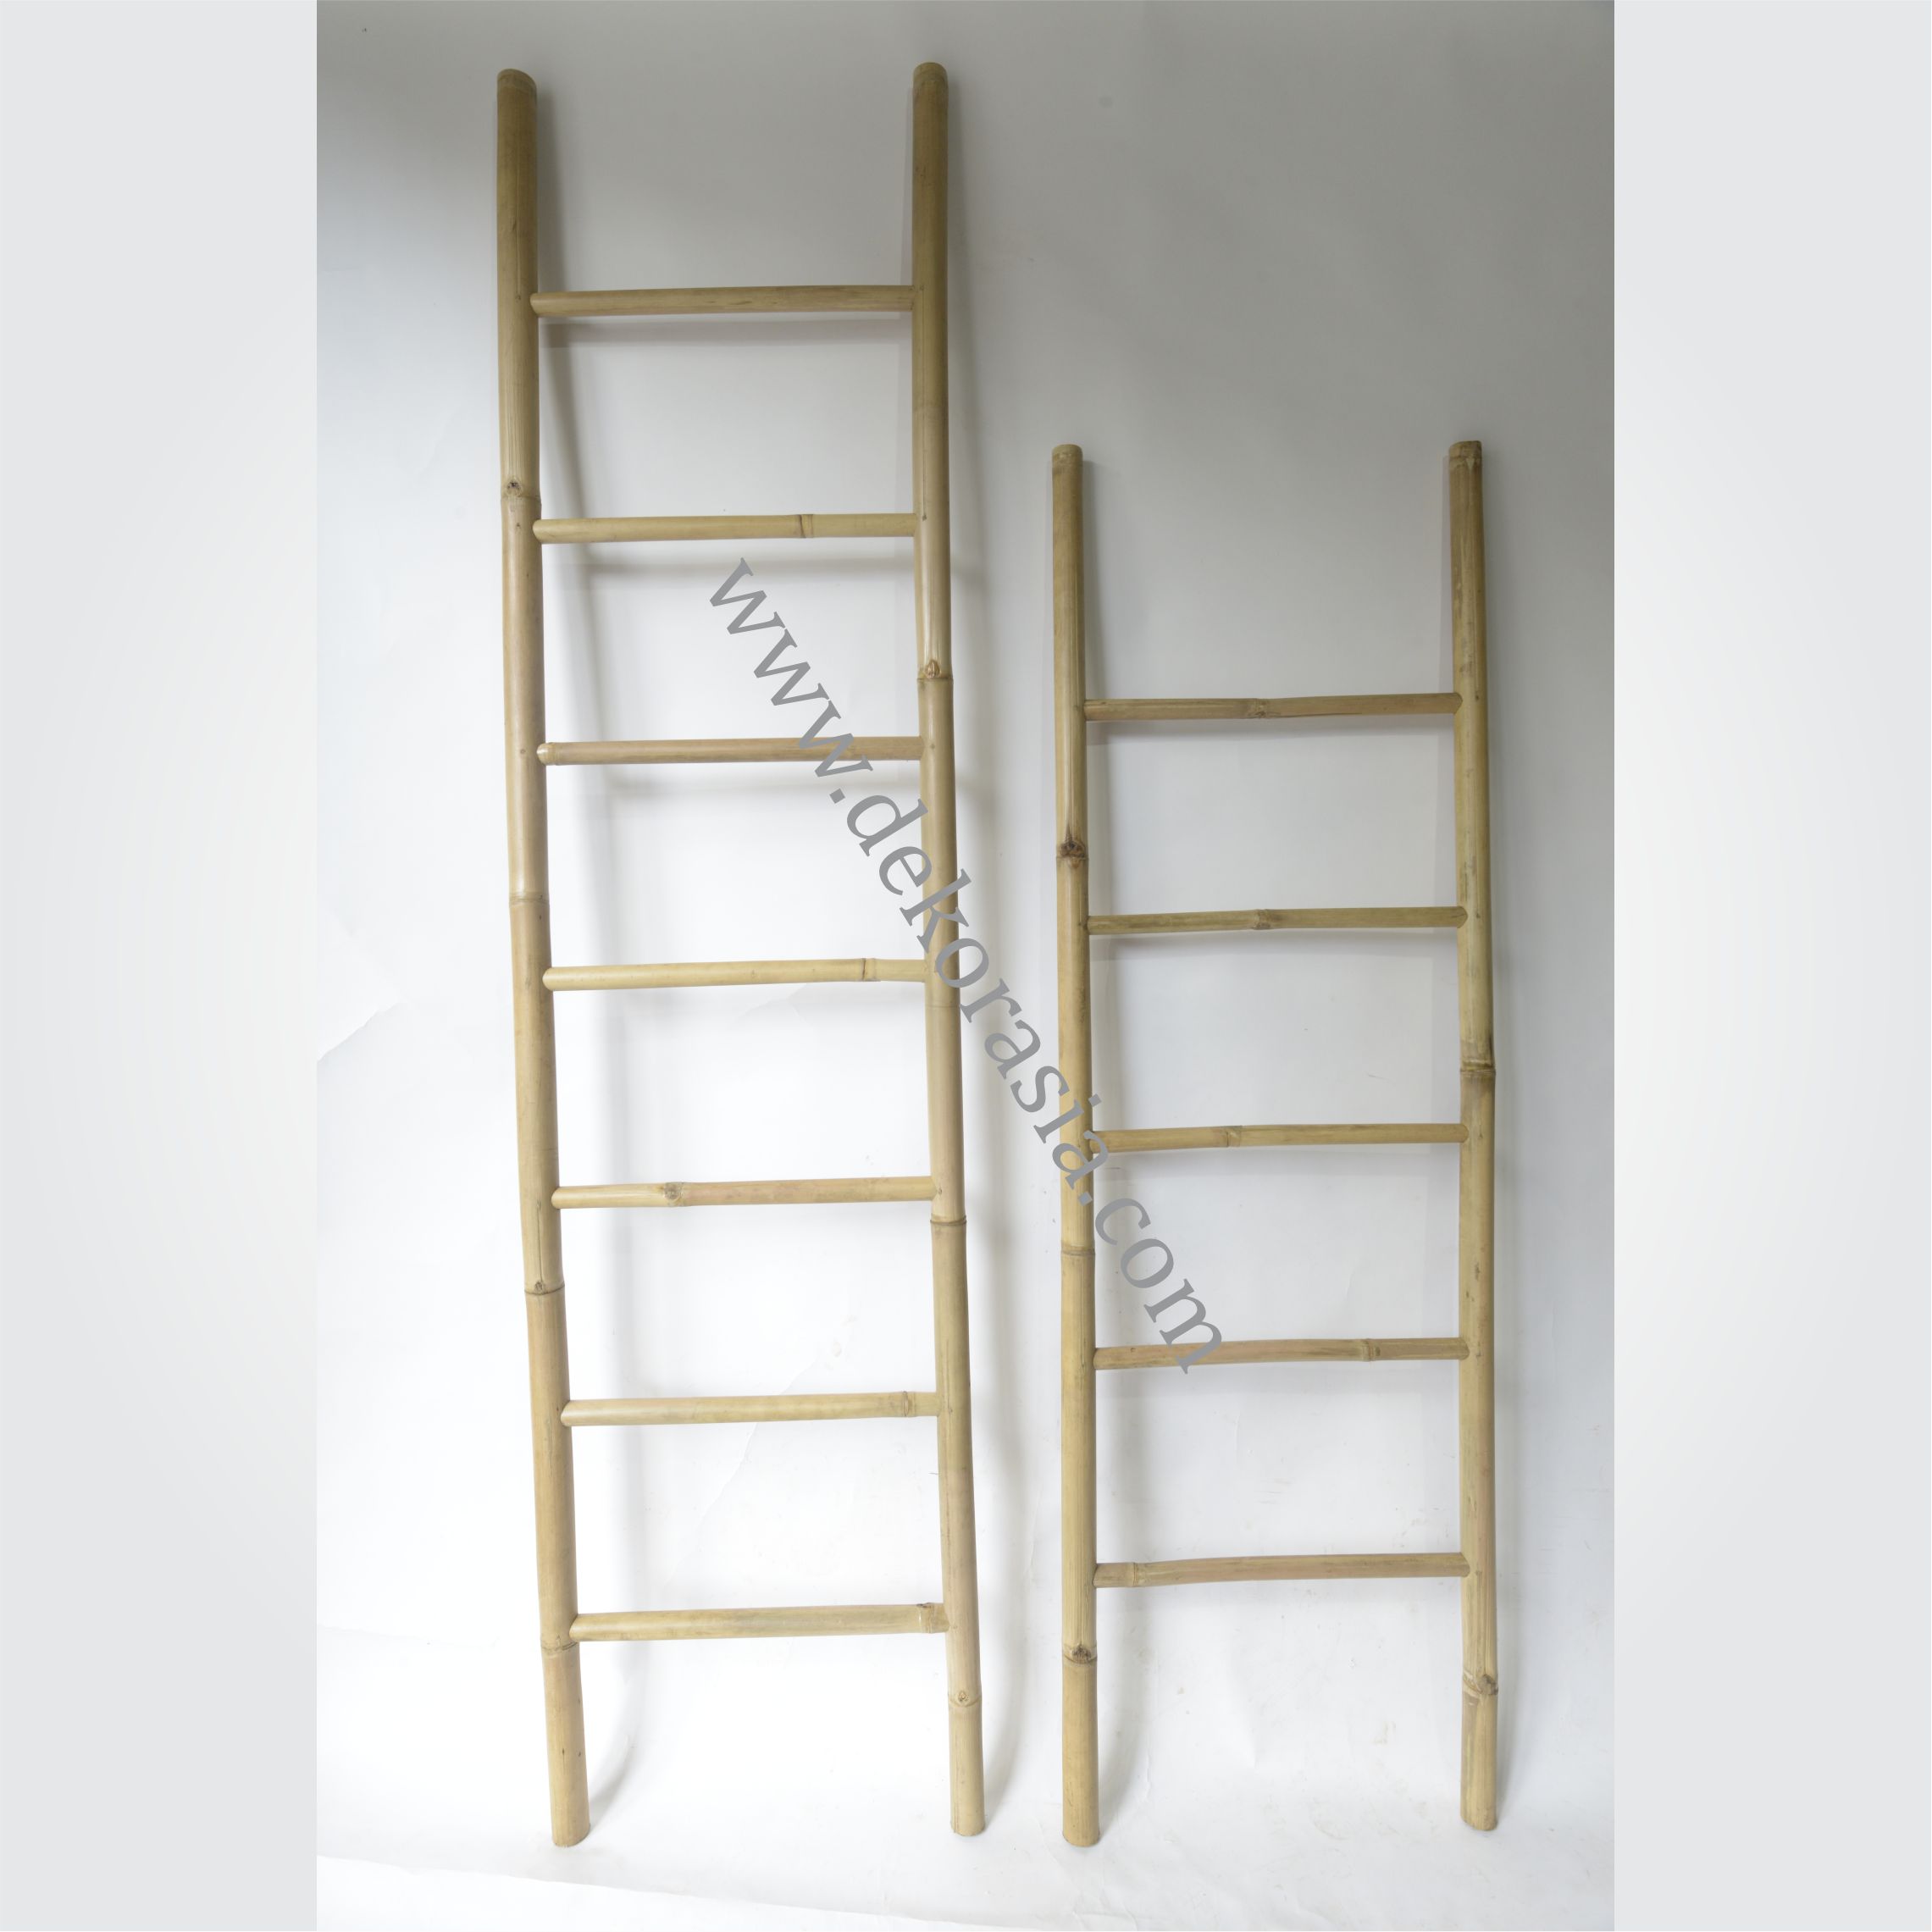 Bamboo Ladder Long Lasting Easy to Use Superb Design Lightweight Attractive Pattern, Bamboo Stand, Bamboo Ladders